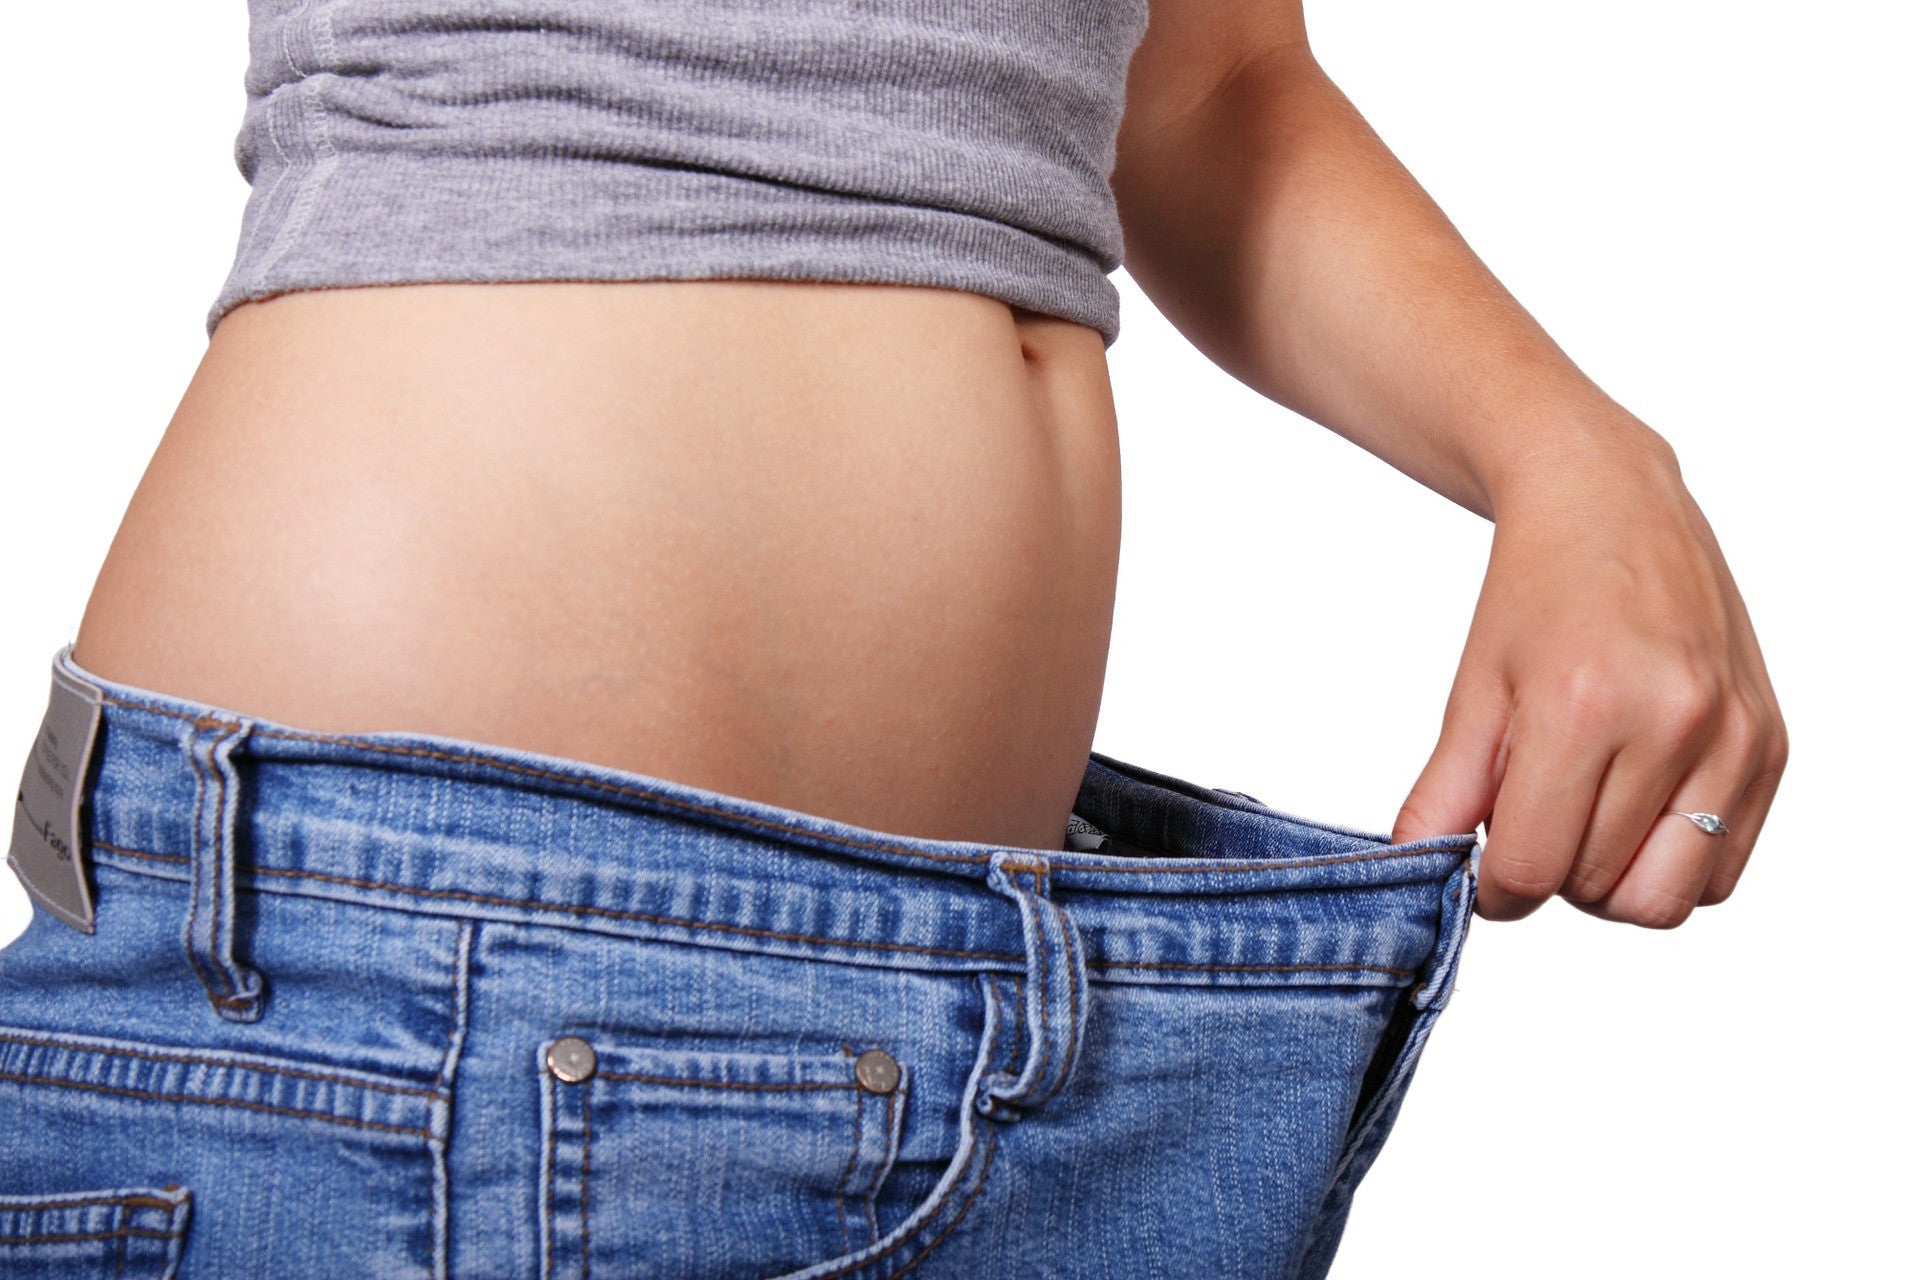 Targeting Belly Fat: Is It Possible? Here’s What Science Says